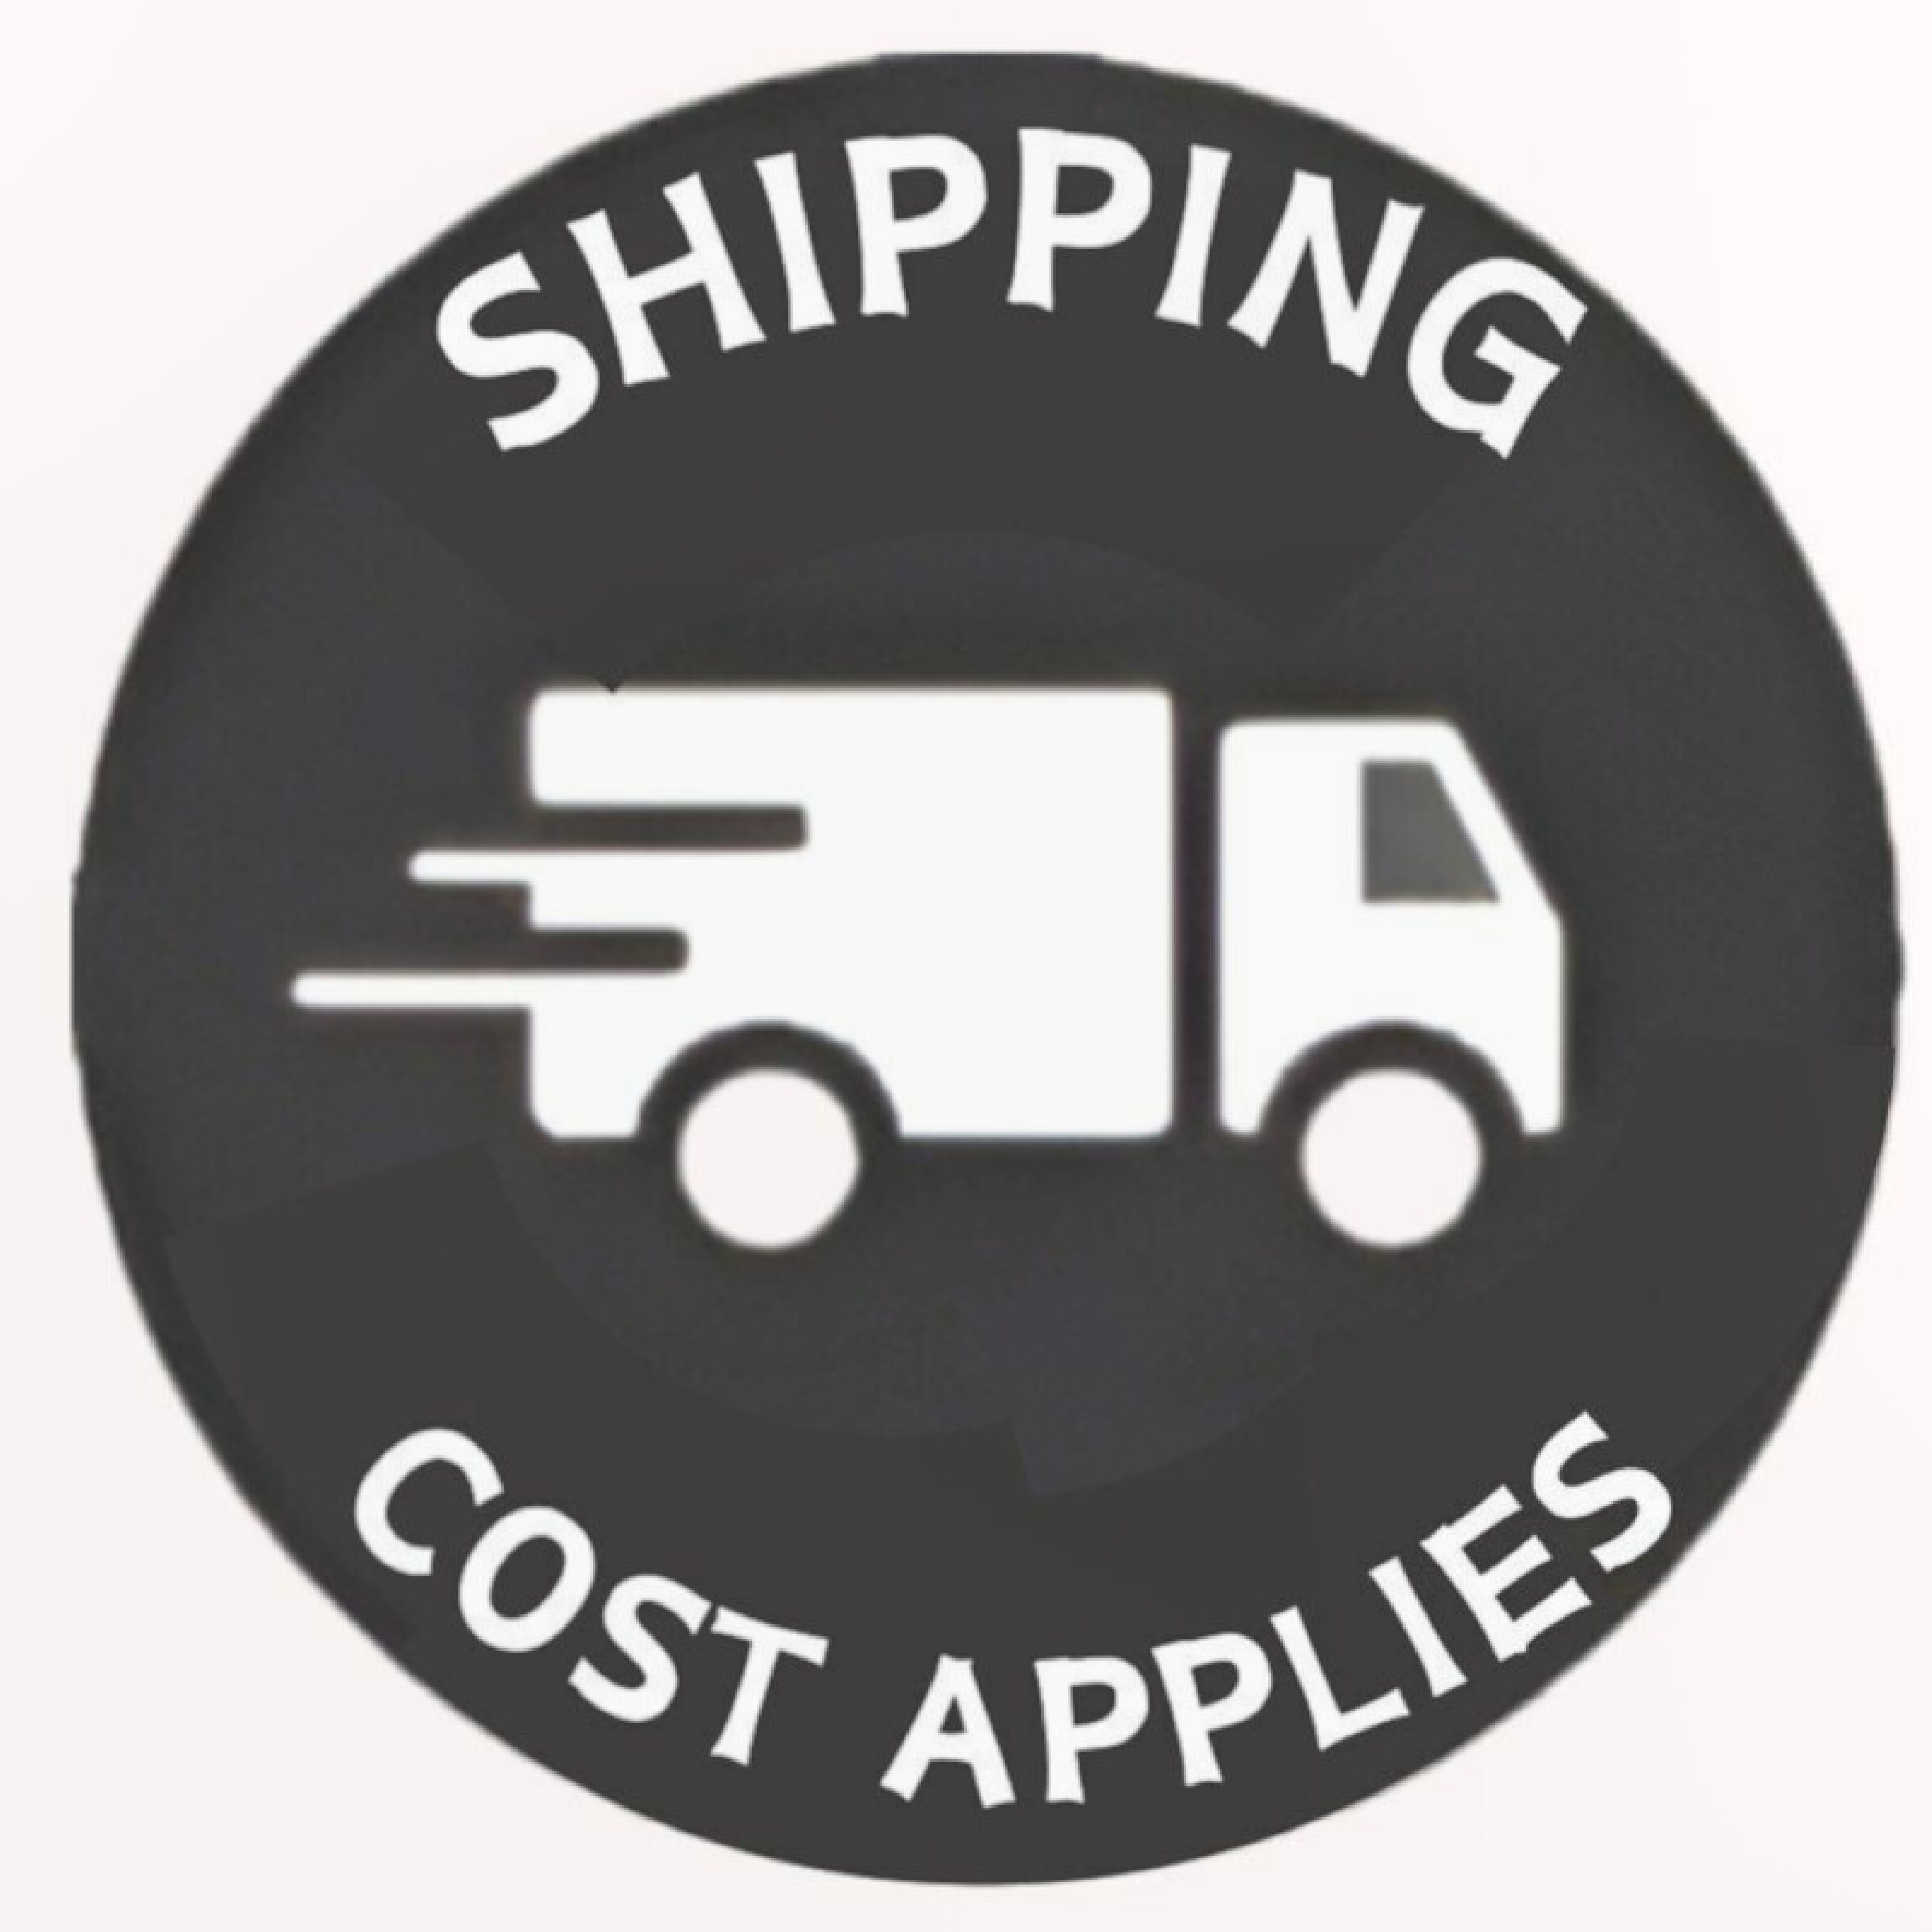  Shipping cost applies